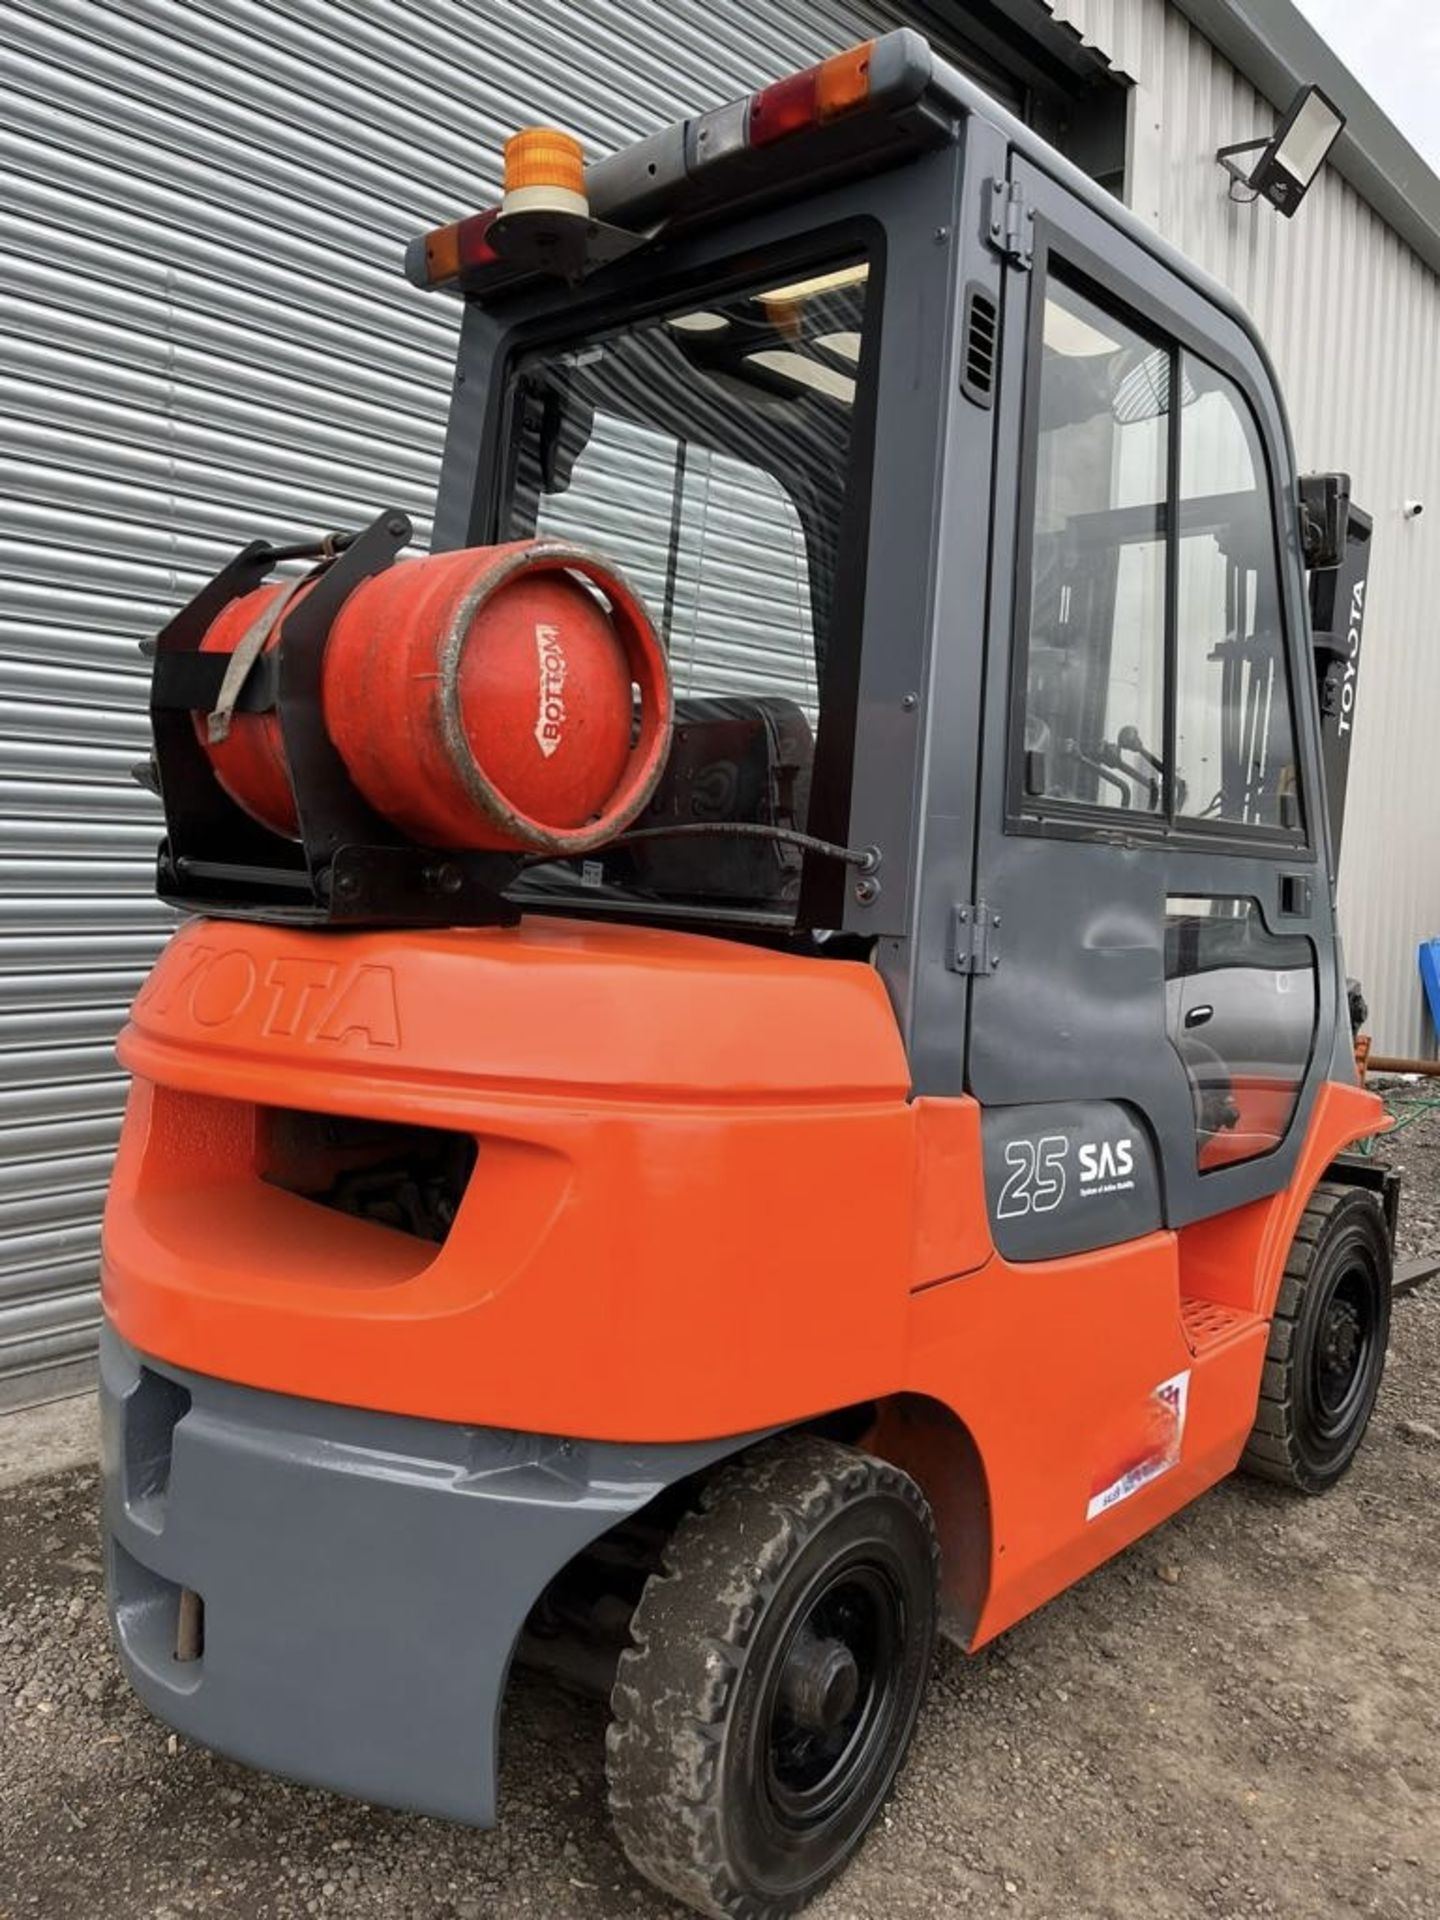 TOYOTA, 2.5 Tonne - Gas Forklift Truck - Image 4 of 11